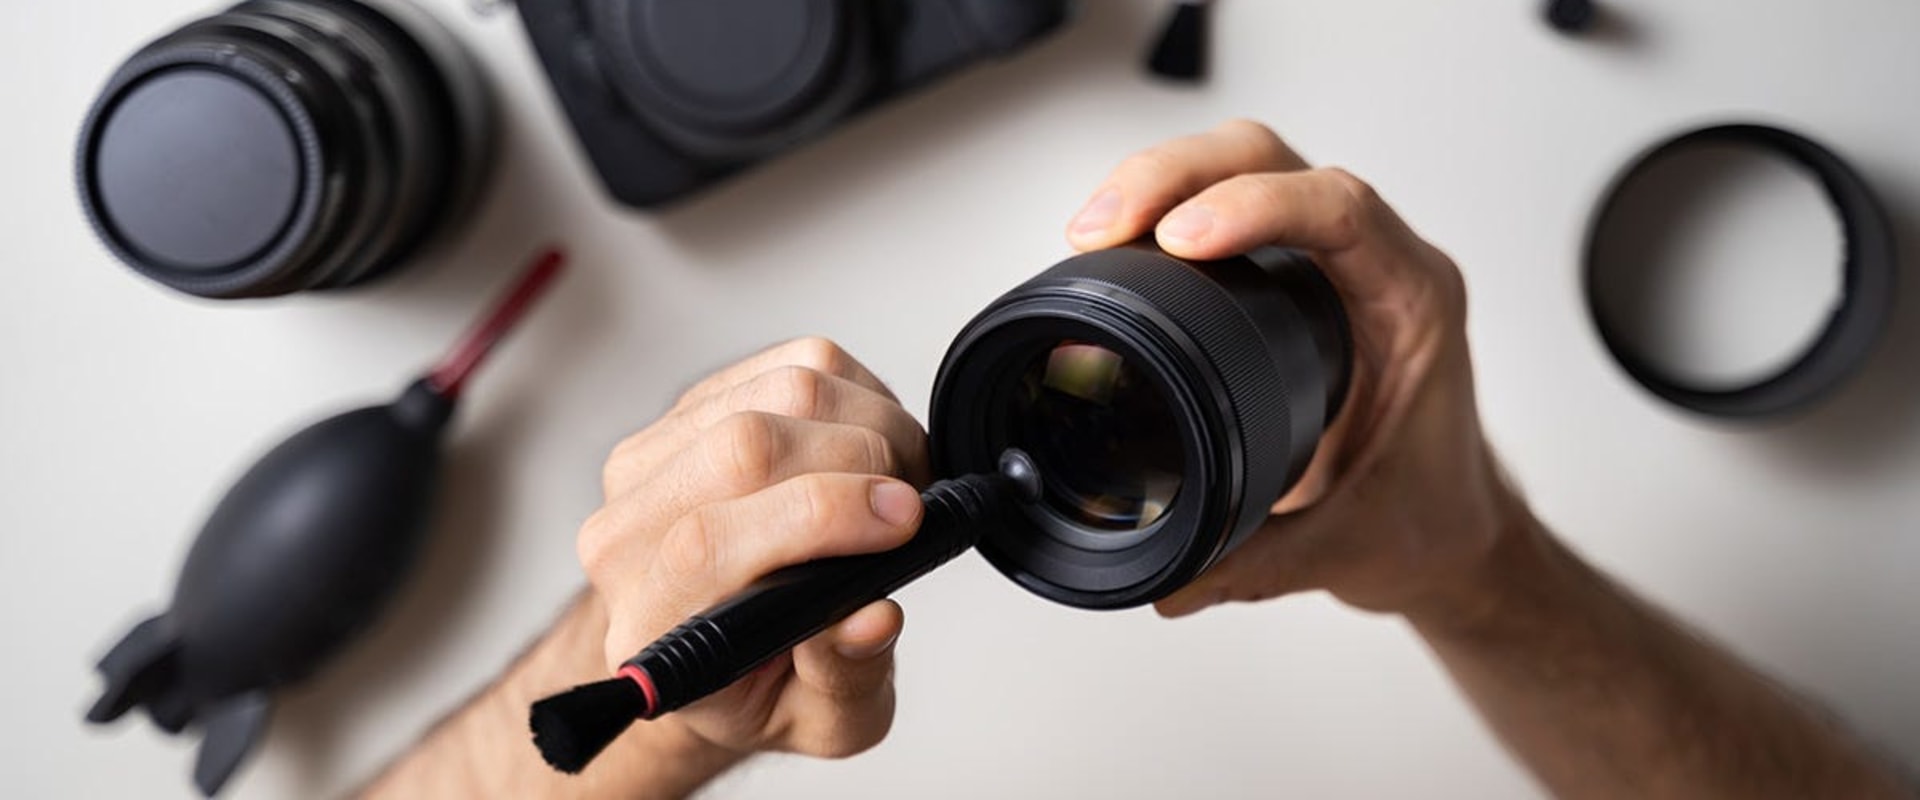 Understanding Camera Bodies and Lenses